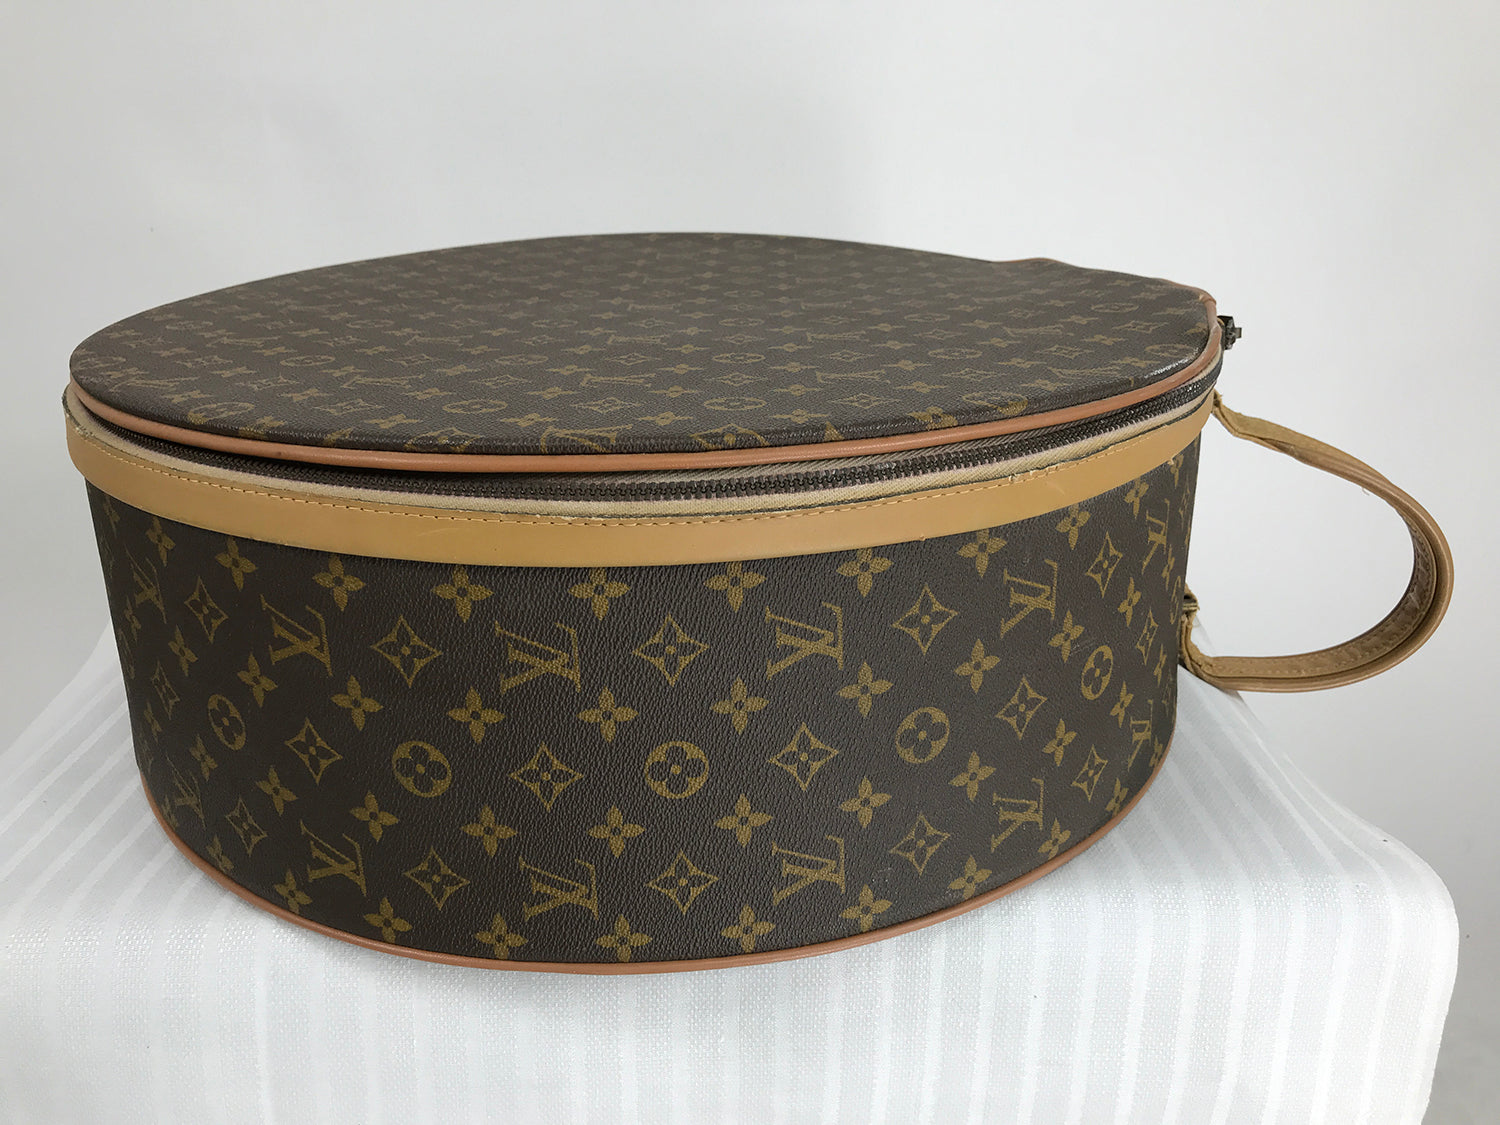 Rare Vintage LOUIS VUITTON French Company Saks Fifth Suitcase 